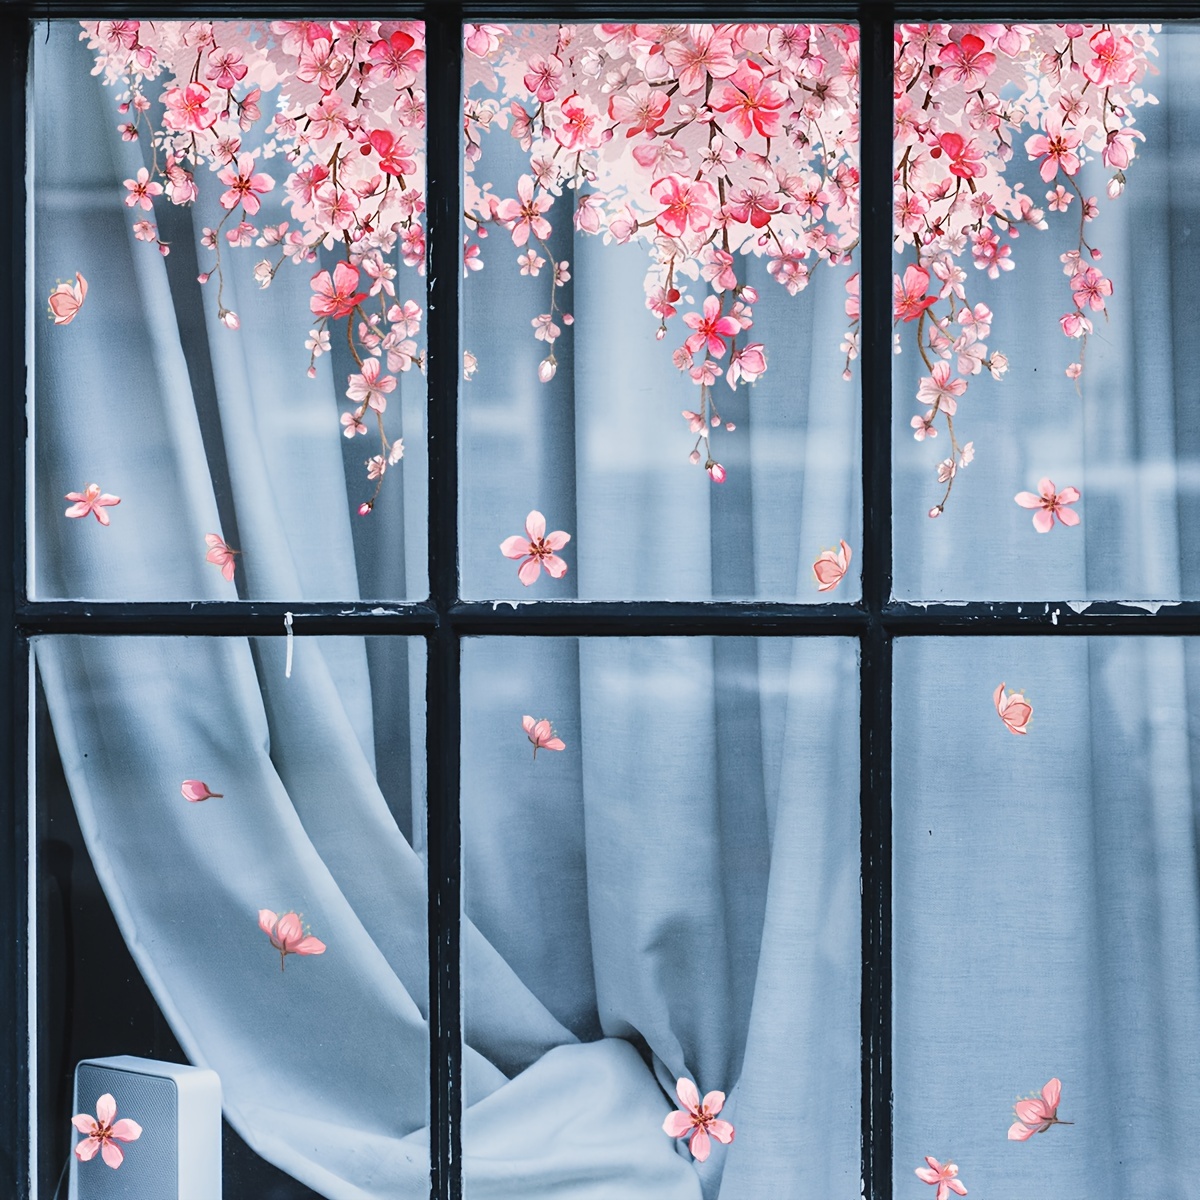 

1pc Cherry Blossom Window Clings, Pink Floral Static Decal, Double-sided Print, Home Wall Sticker, Transparent Plastic, Decorative Glass Door Film For Home Decor